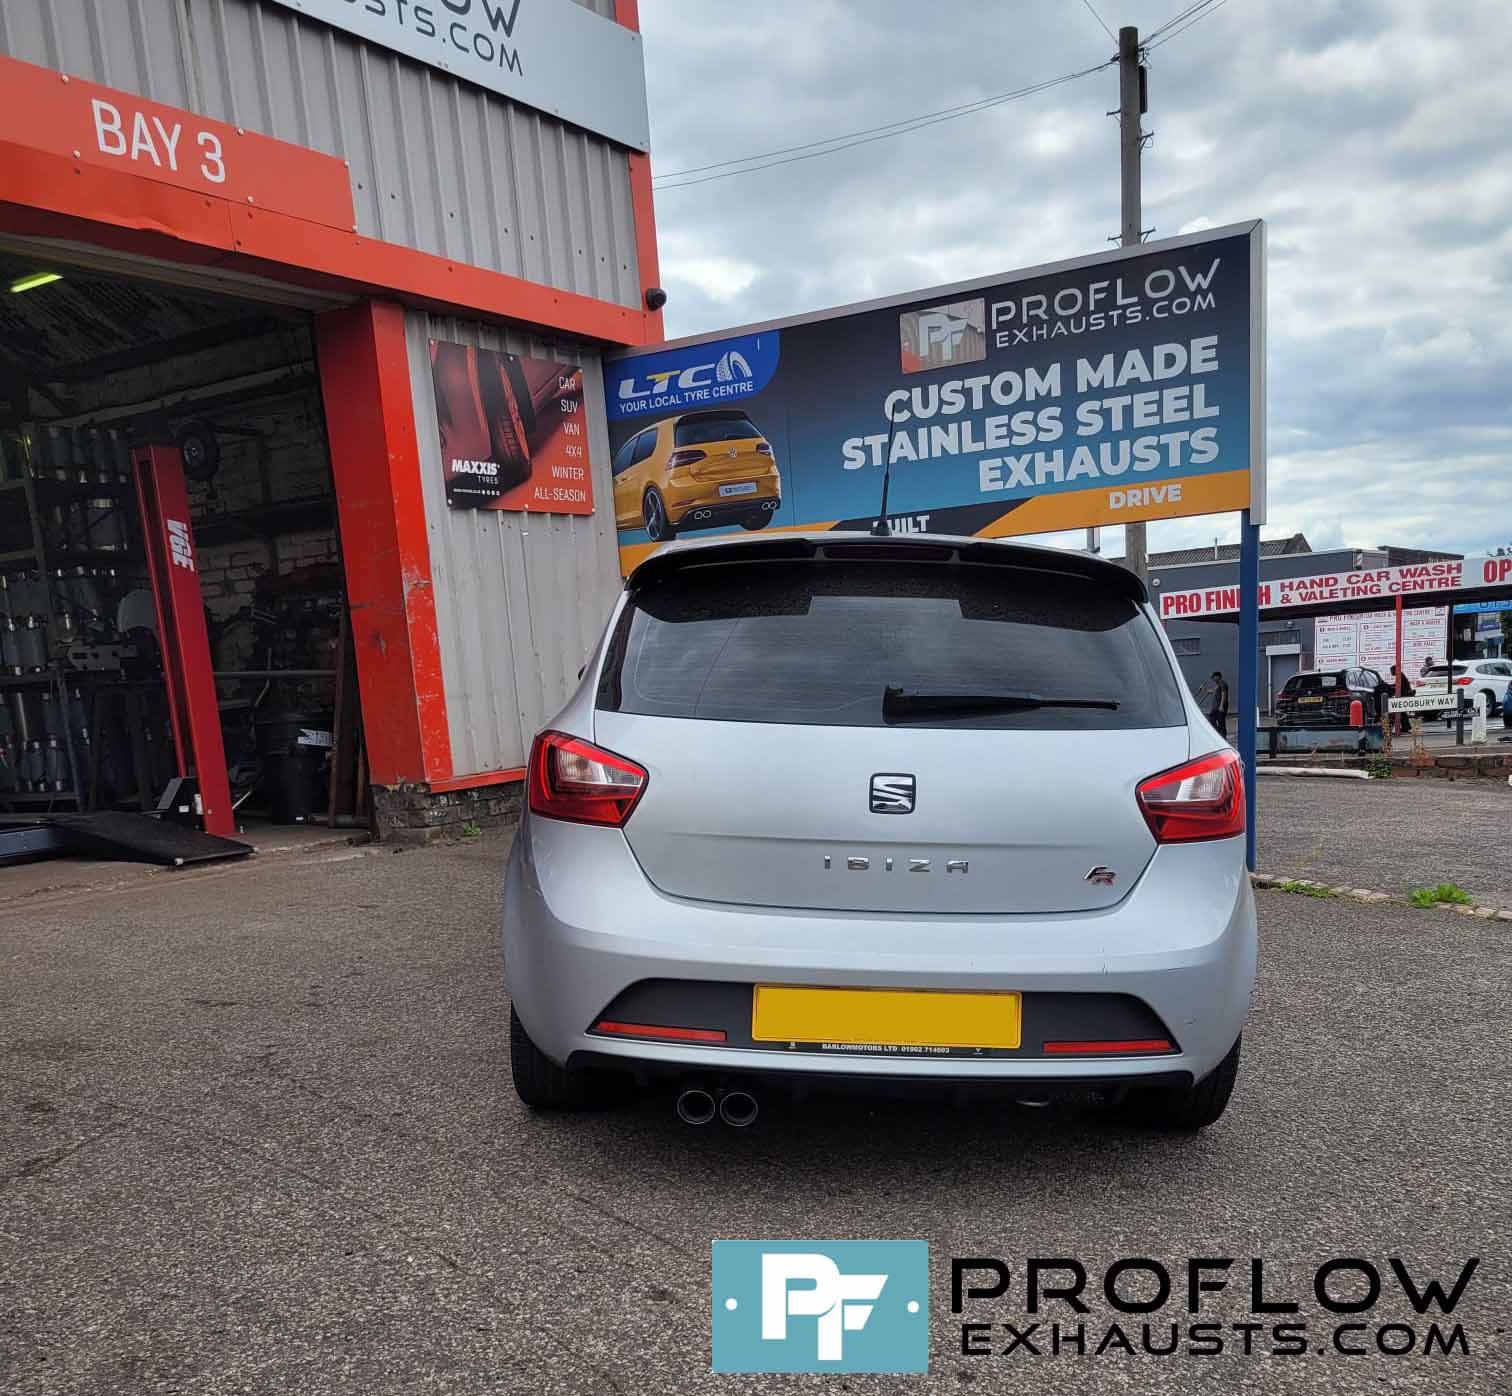 Seat Ibiza Custom Exhaust Back Box Delete With Twin Tailpipe Made From Stainless Steel (6)